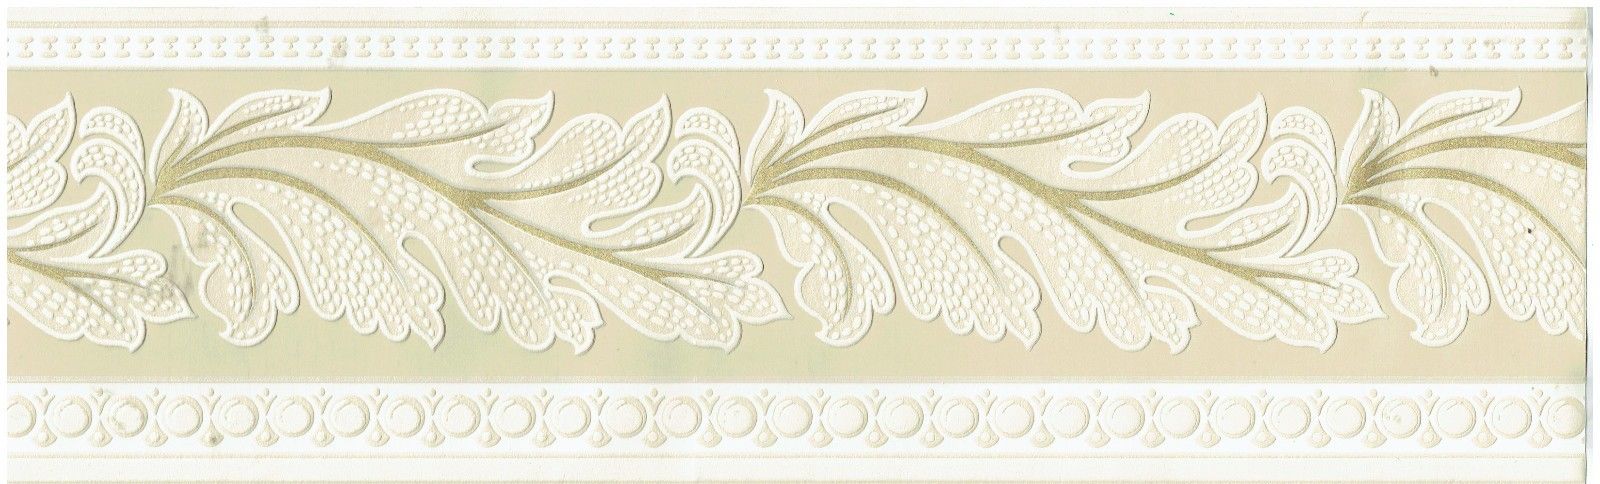 Upc 734565922377 Product Image For Tanned Victorian - Wallpaper , HD Wallpaper & Backgrounds